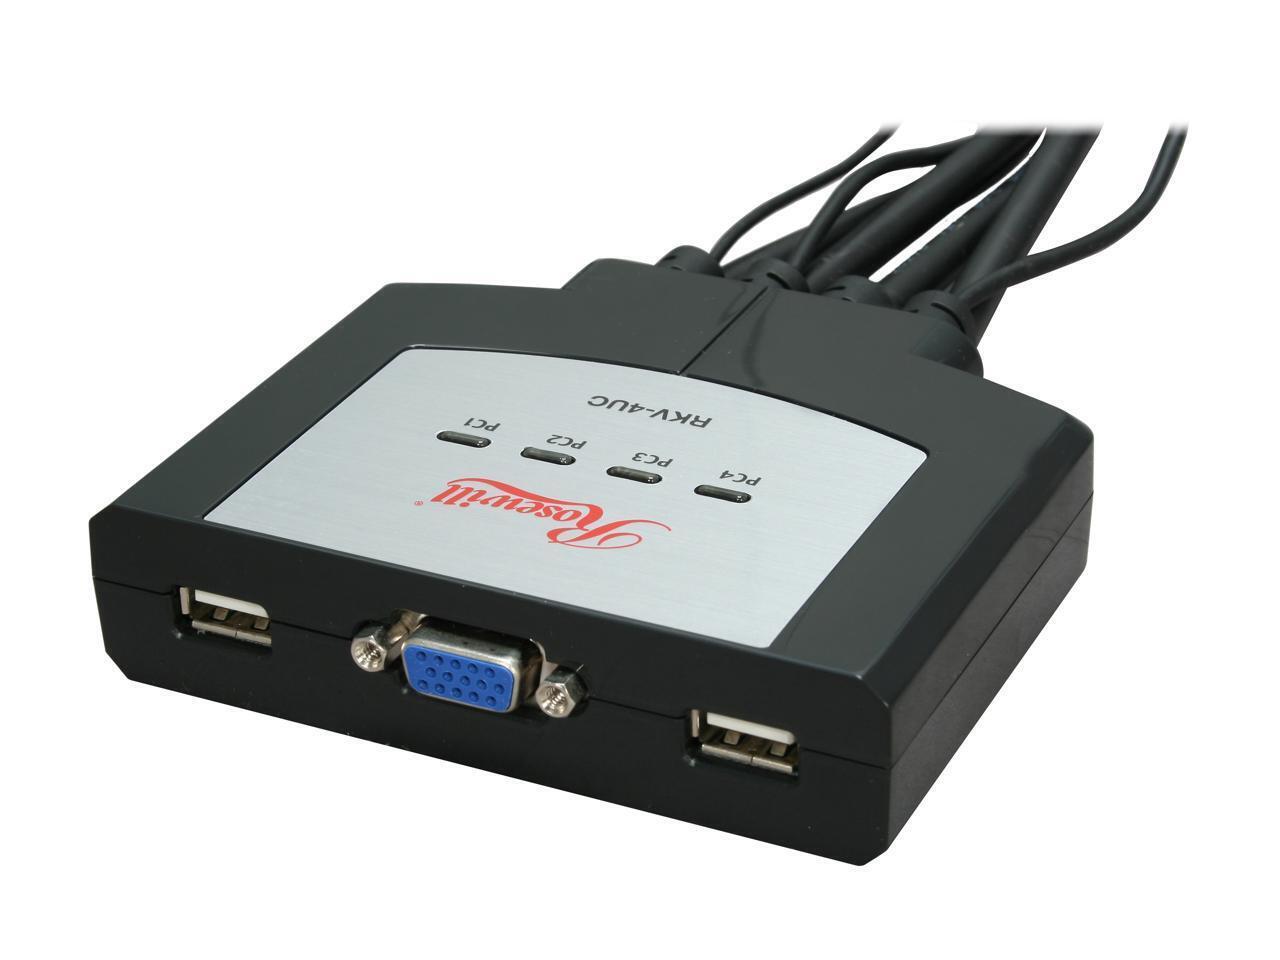 Rosewill RKV-4UC 4 Port USB Cable KVM, 0.9m Cable Built with Speaker MIC Remote